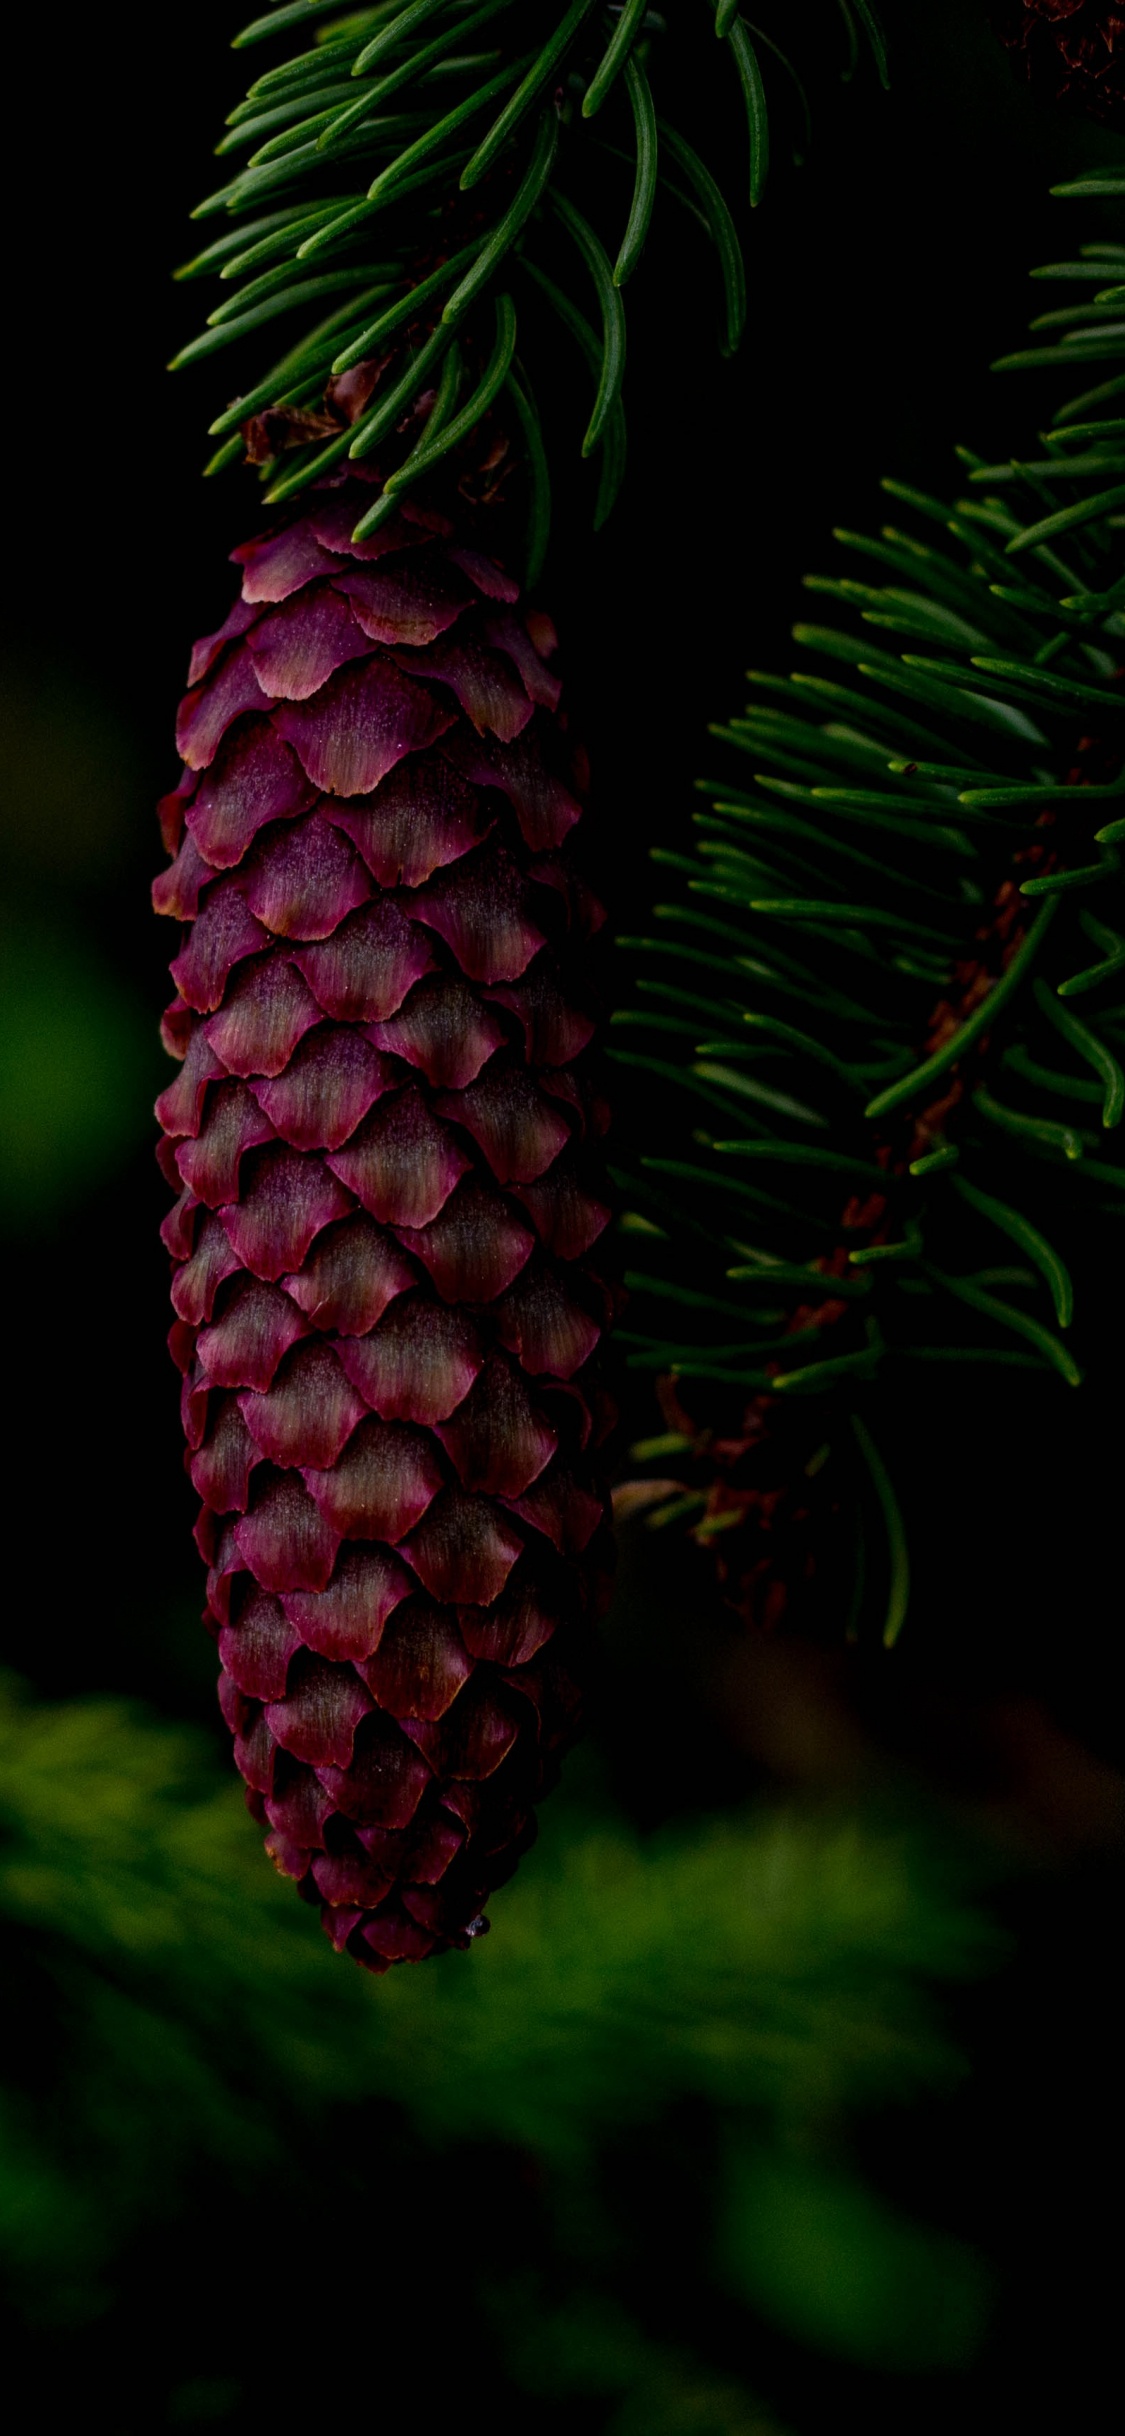 Red Pine Cone on Green Pine Tree. Wallpaper in 1125x2436 Resolution